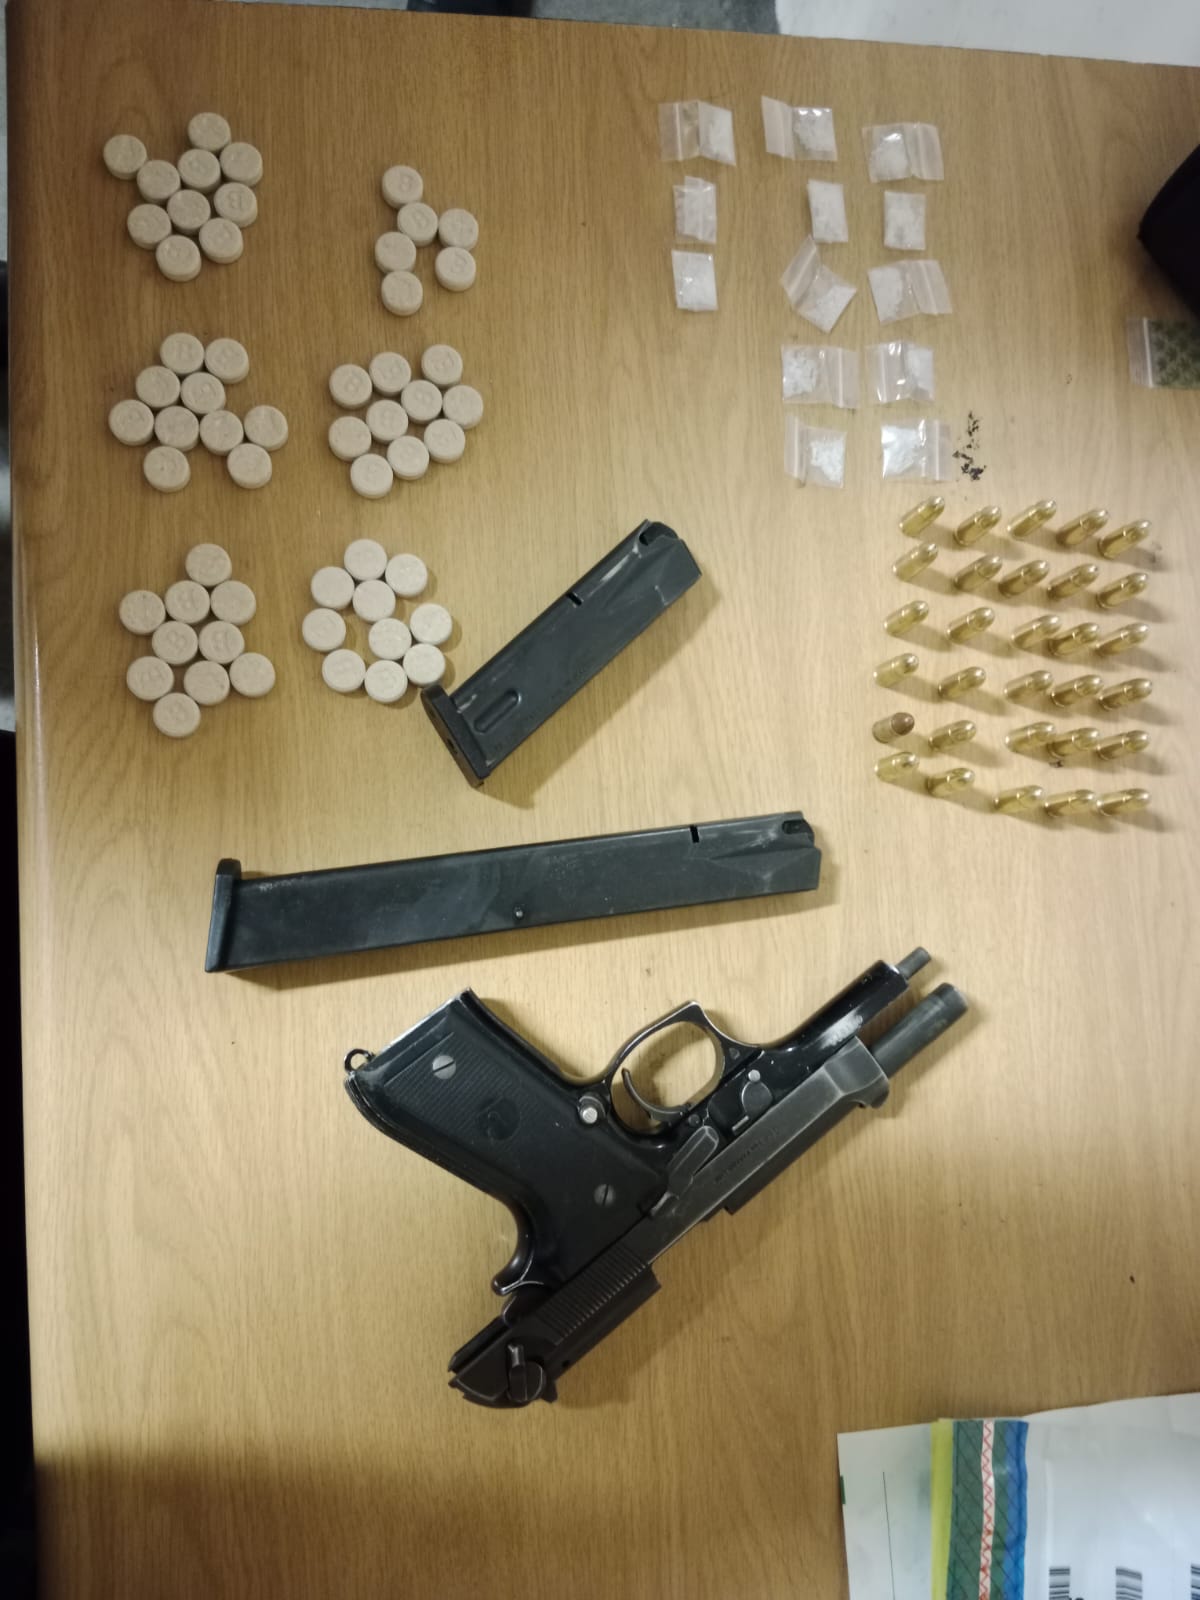 Crime prevention operation leads to discovery of firearms, ammunition and drugs